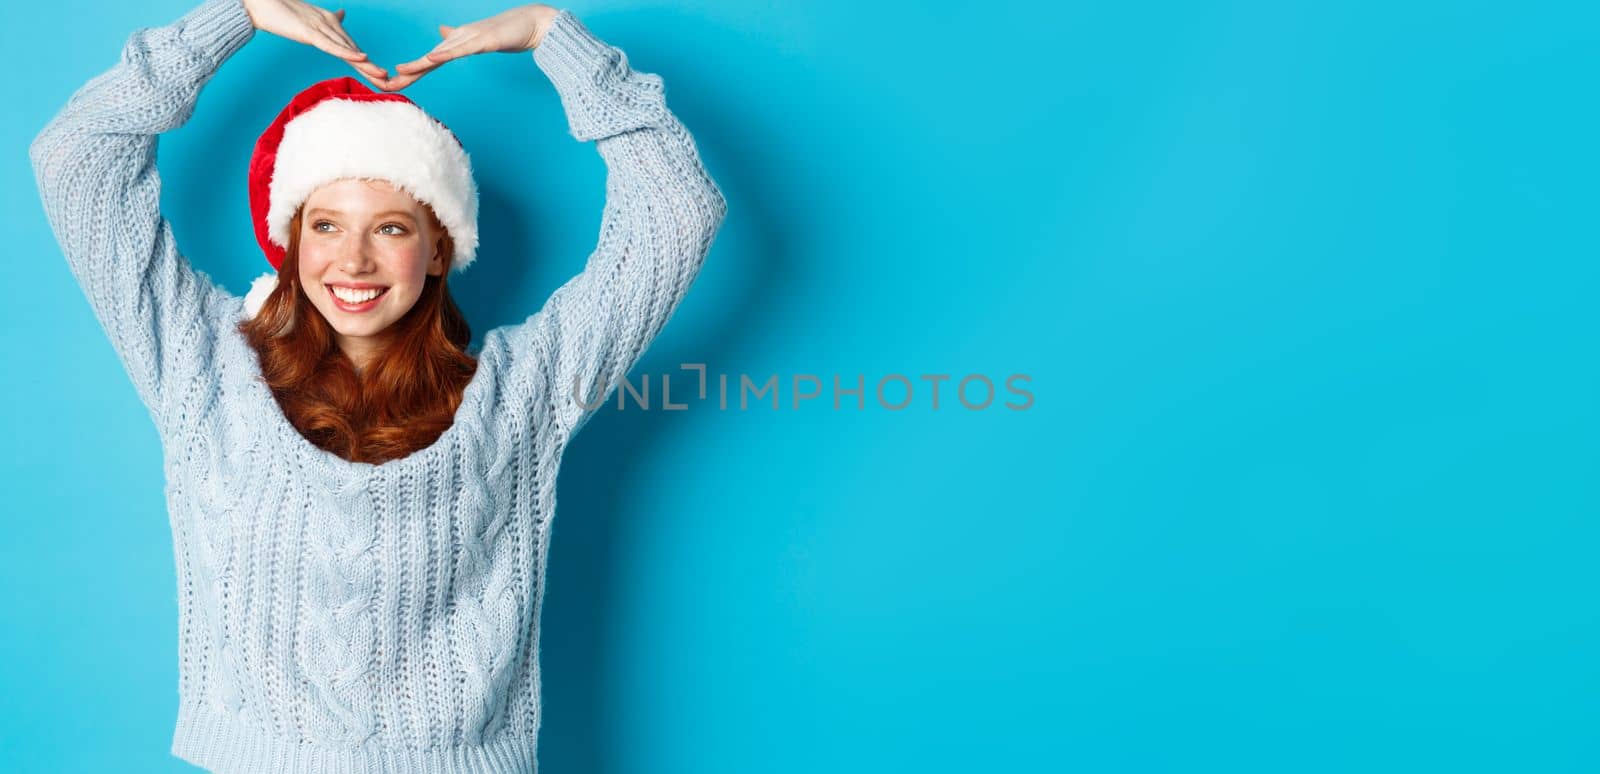 Winter holidays and Christmas Eve concept. Cute redhead teen girl in santa hat and sweater, making heart sign and smiling, wishing merry xmas, standing over blue background.